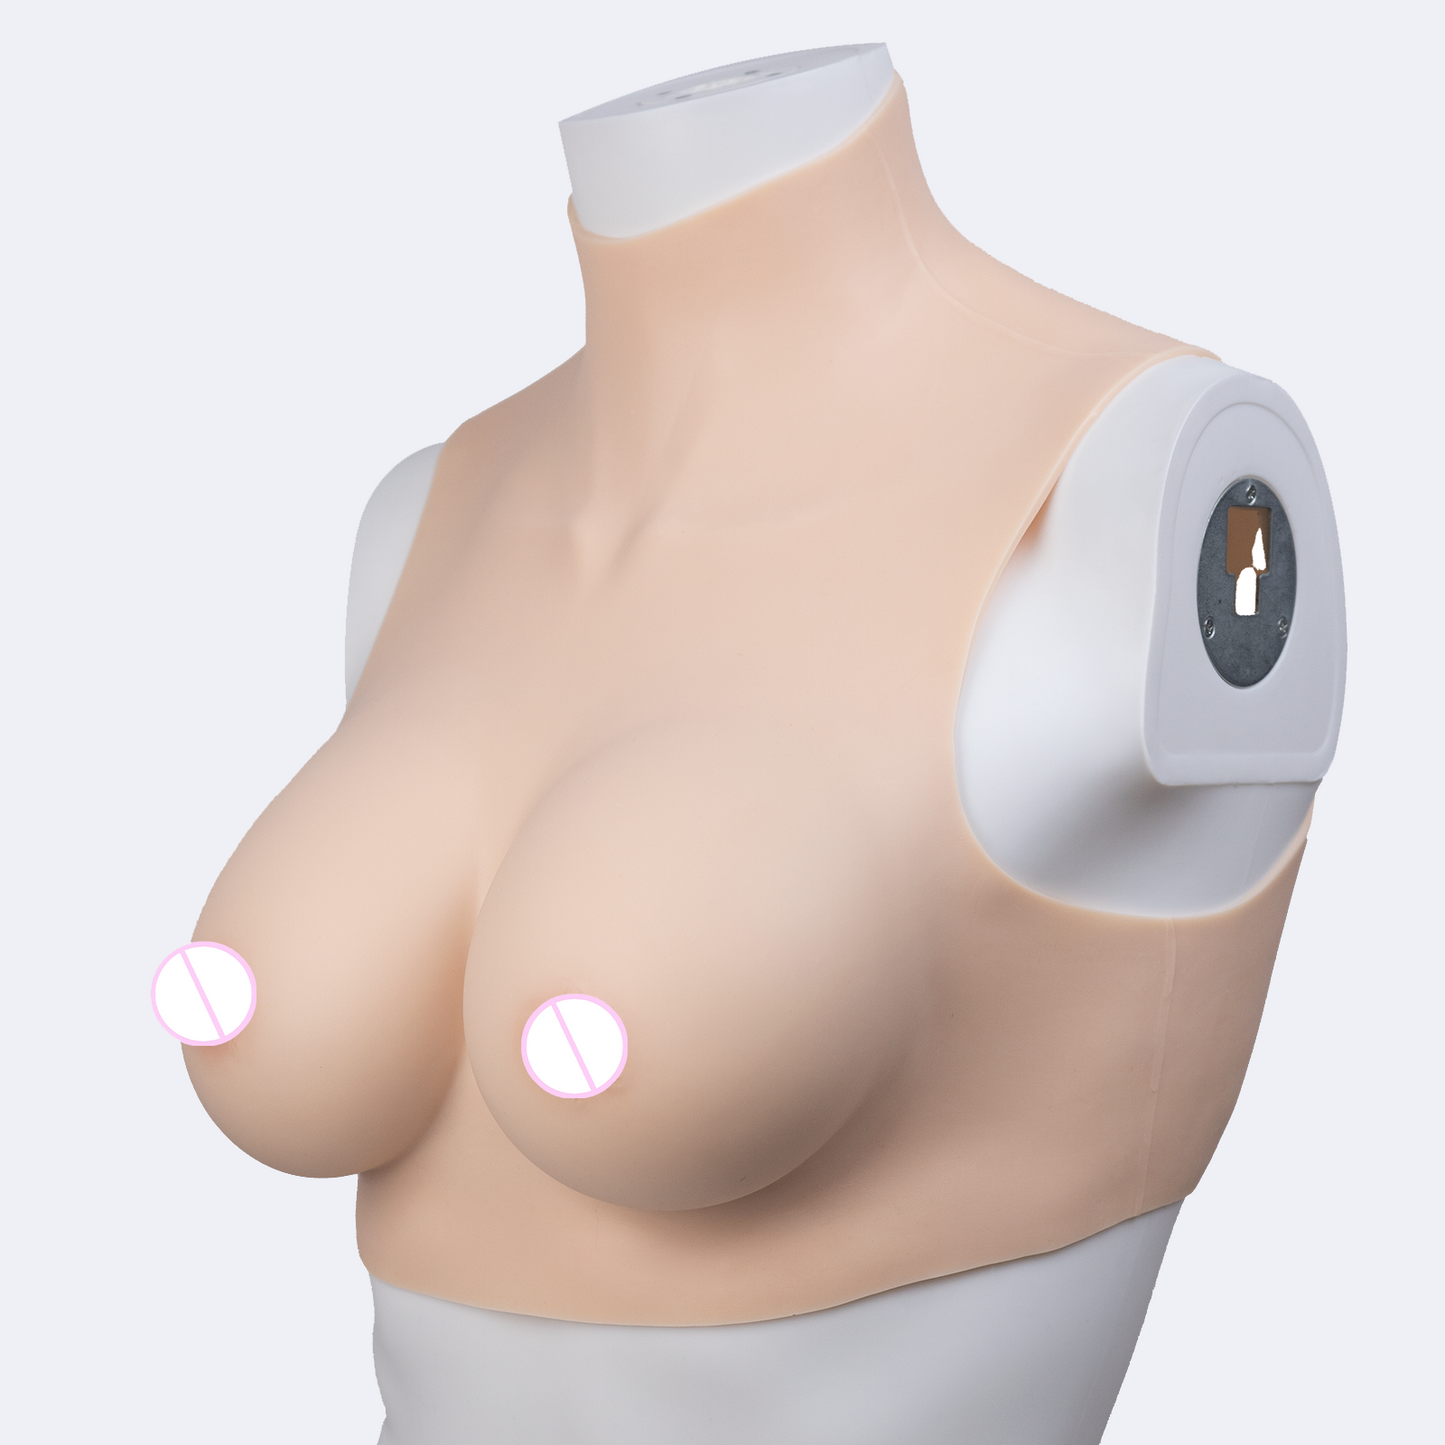 Regular E Cup fake breasts